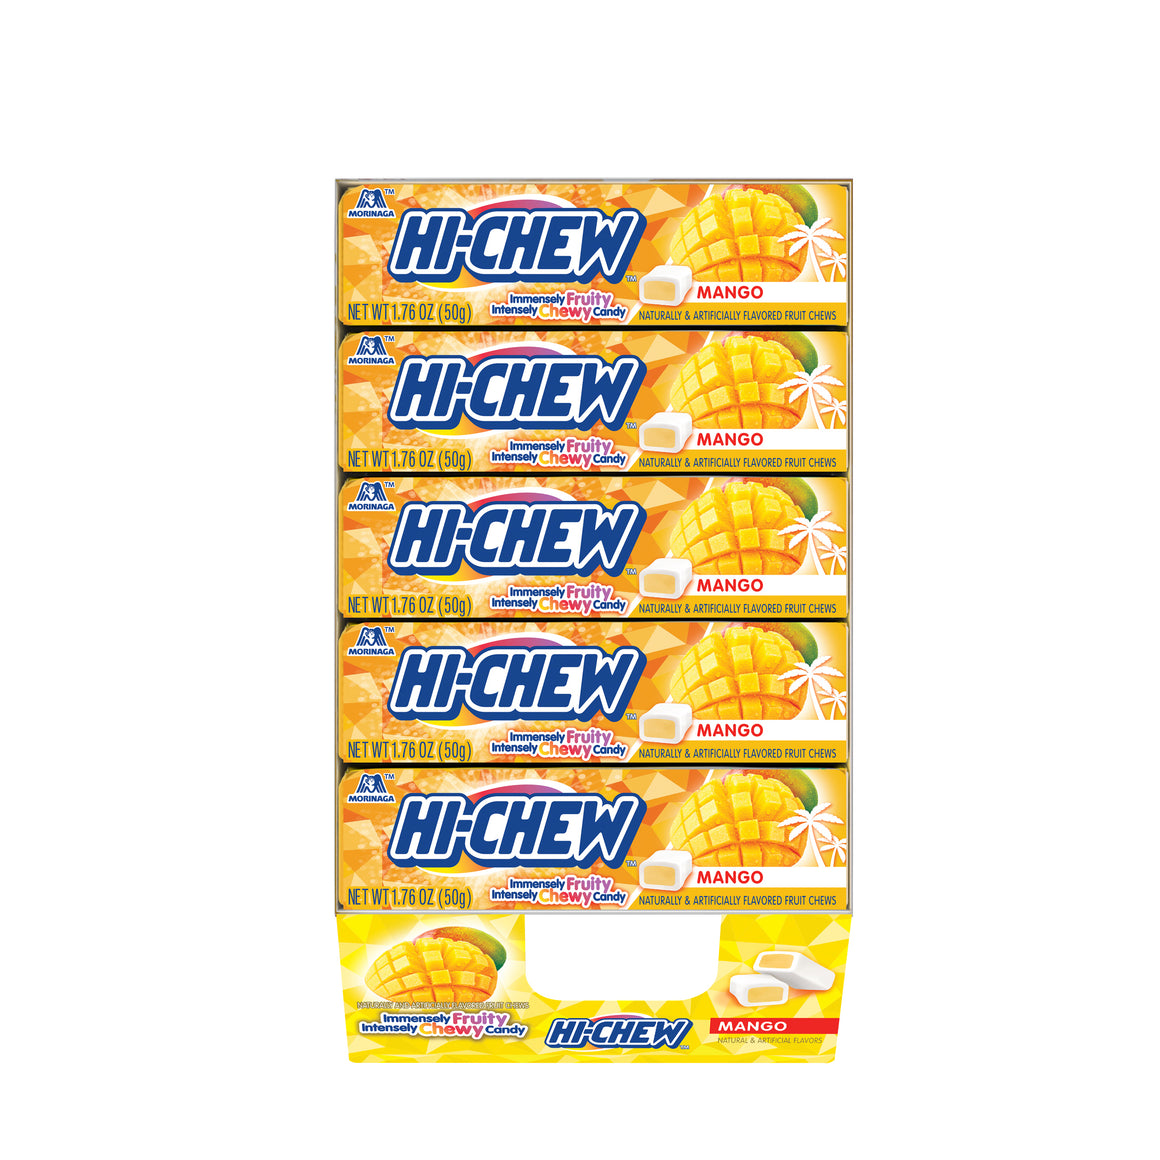 All City Candy Hi-Chew Mango Fruit Chews - 1.76-oz. Bar Chewy Morinaga & Company 1 Pack For fresh candy and great service, visit www.allcitycandy.com